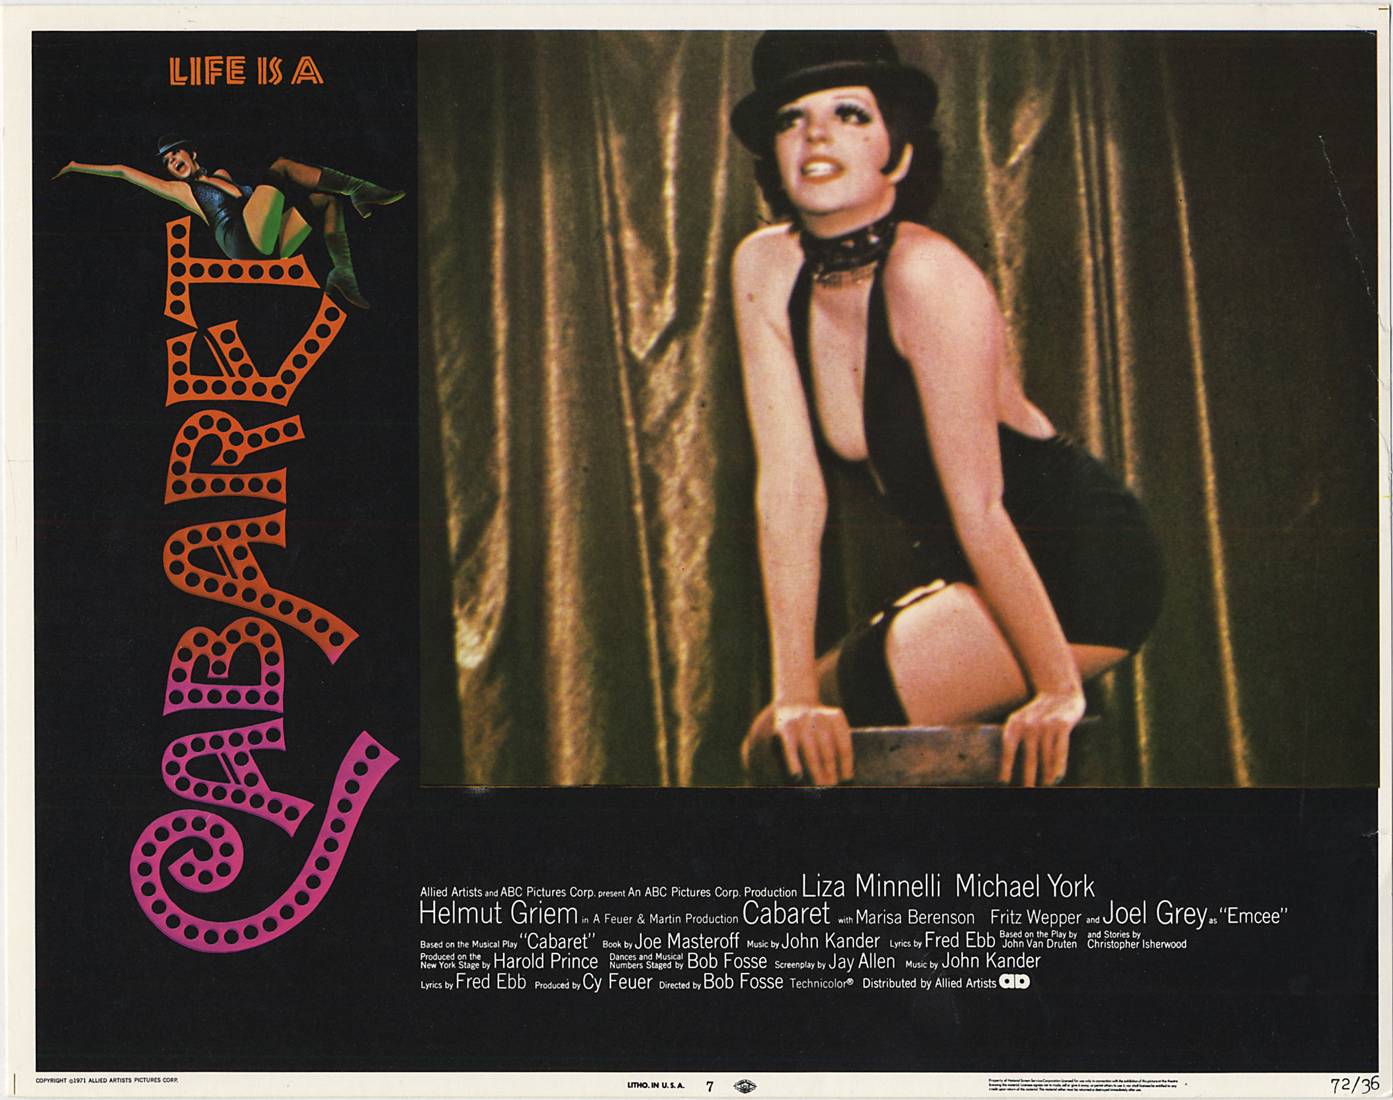 Lobby card #7 for Cabaret starring Liza Mannelli (1972)